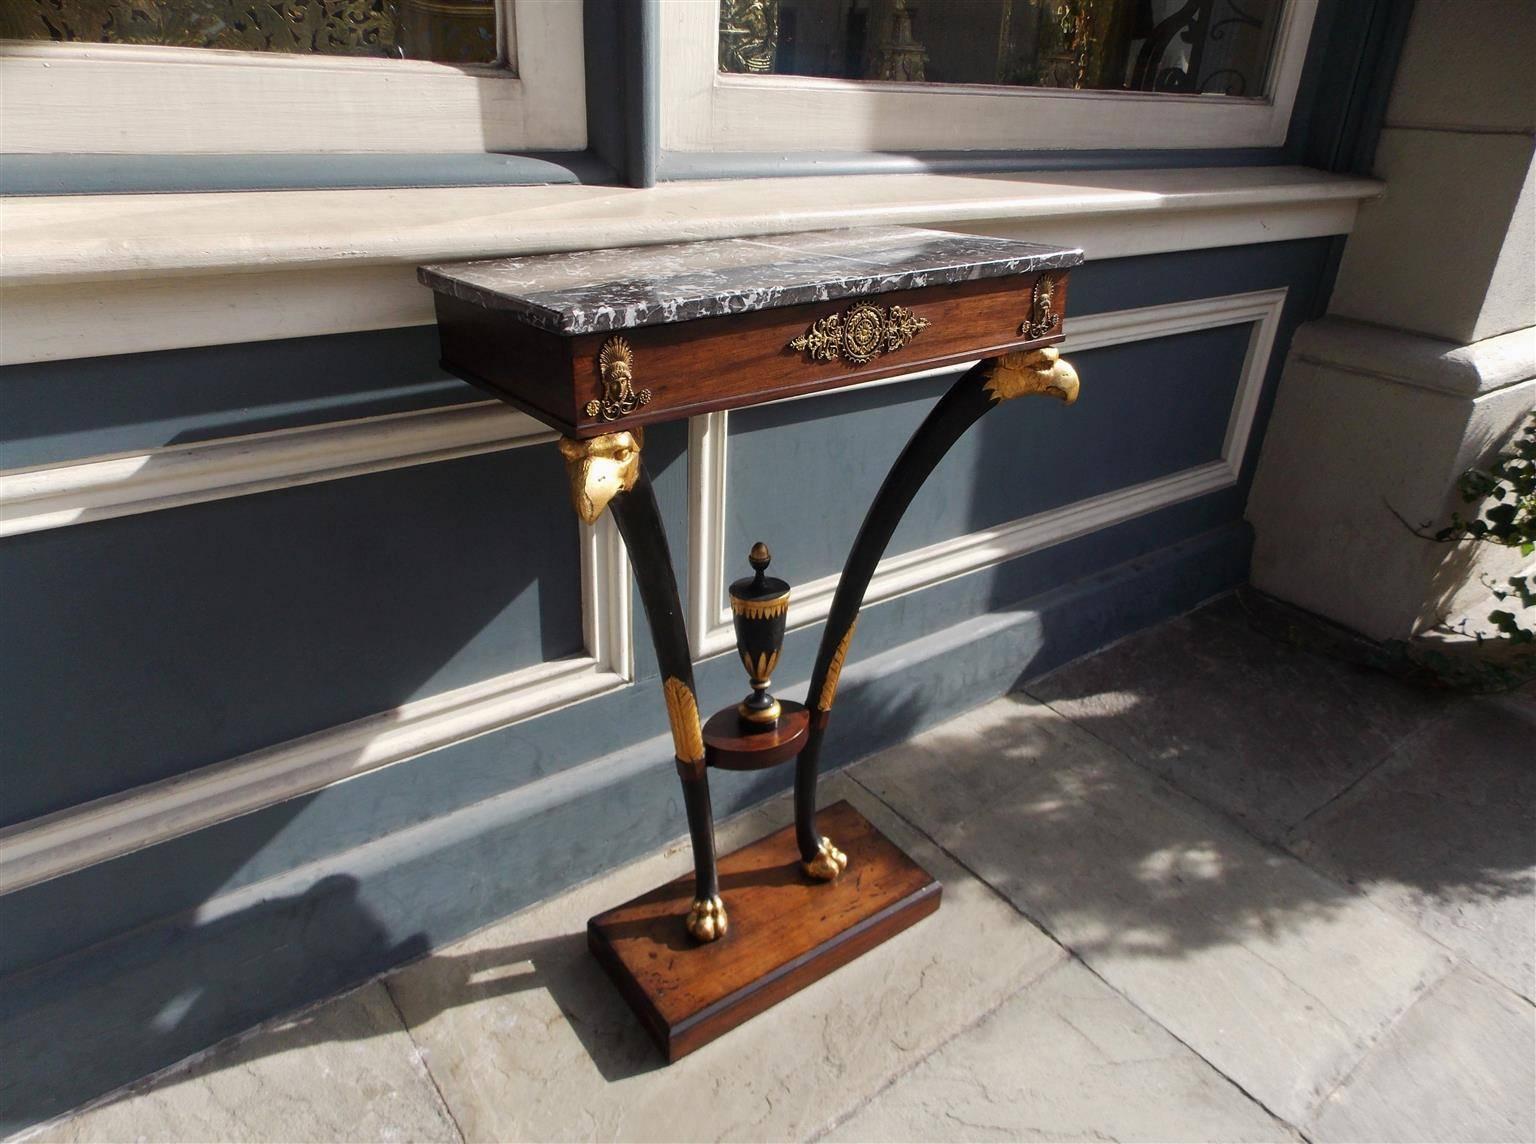 English Regency mahogany marble-top console with flanking Phoenix heads, original ormolu mounts, ebonized tapered legs, centered gilt urn and terminating on rectangular molded edge base with stylized claw feet, Late 18th Century. 
Measures: Marble